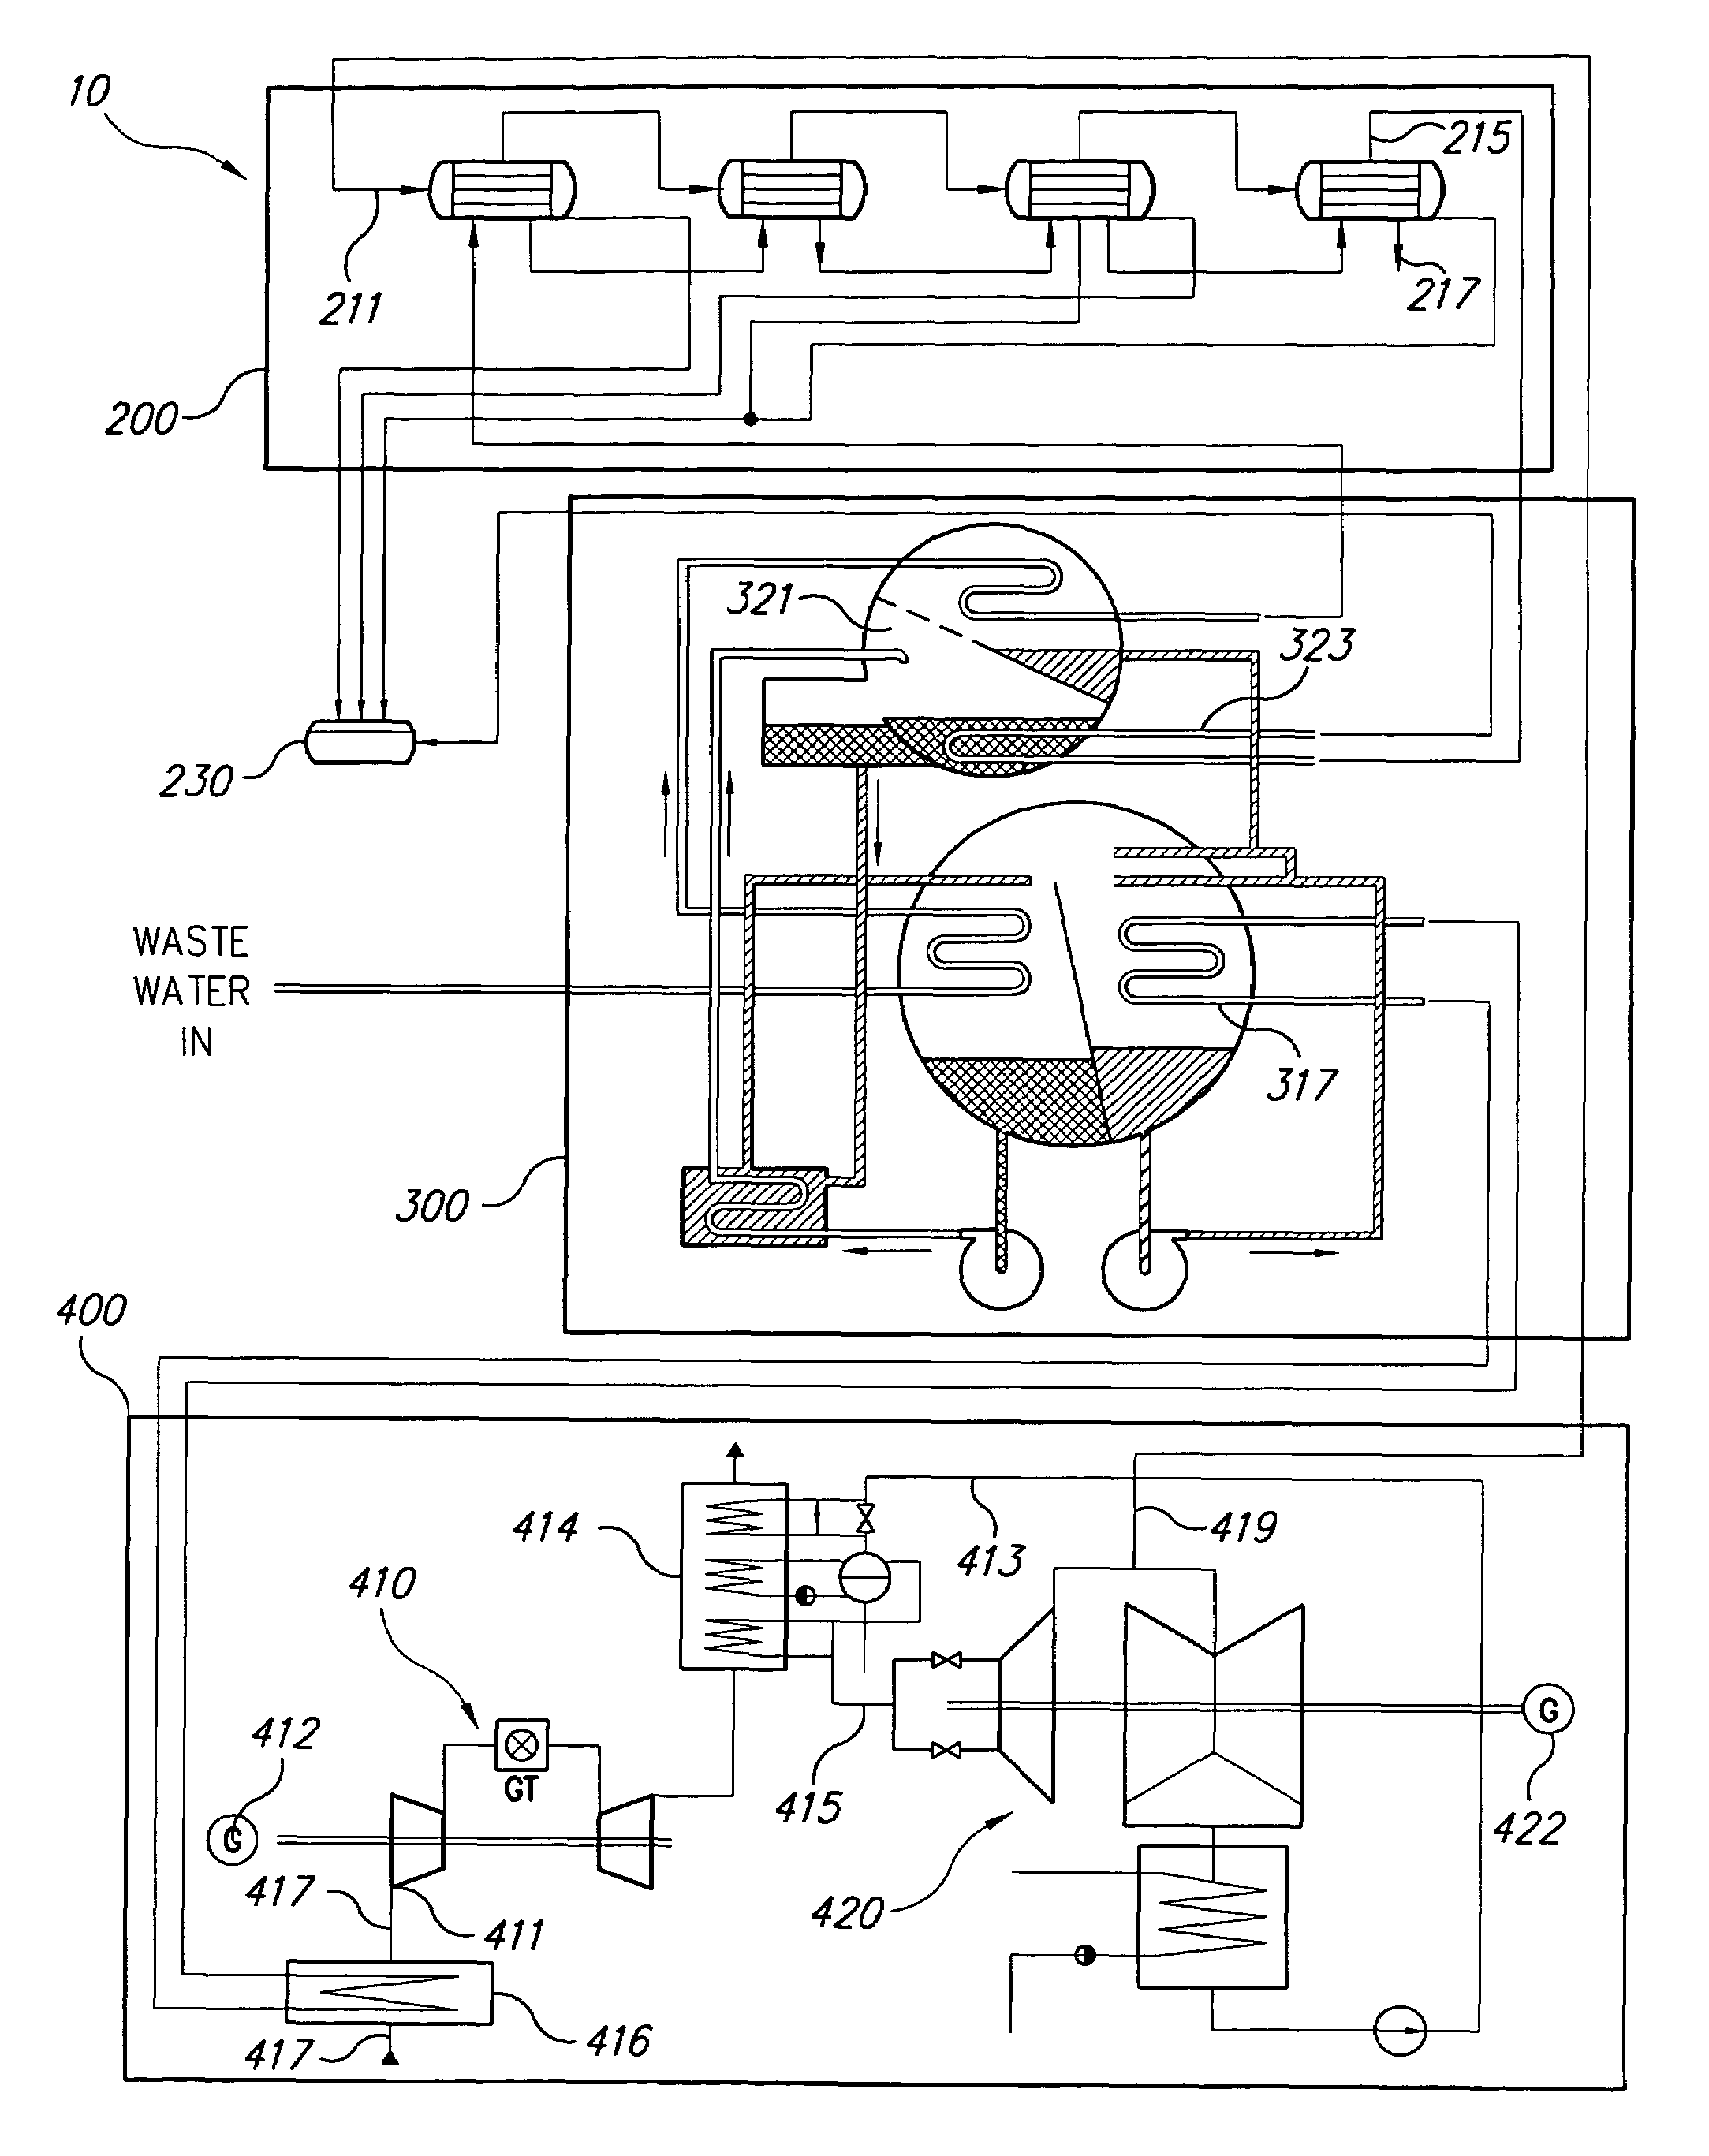 System for augmented electric power generation with distilled water output